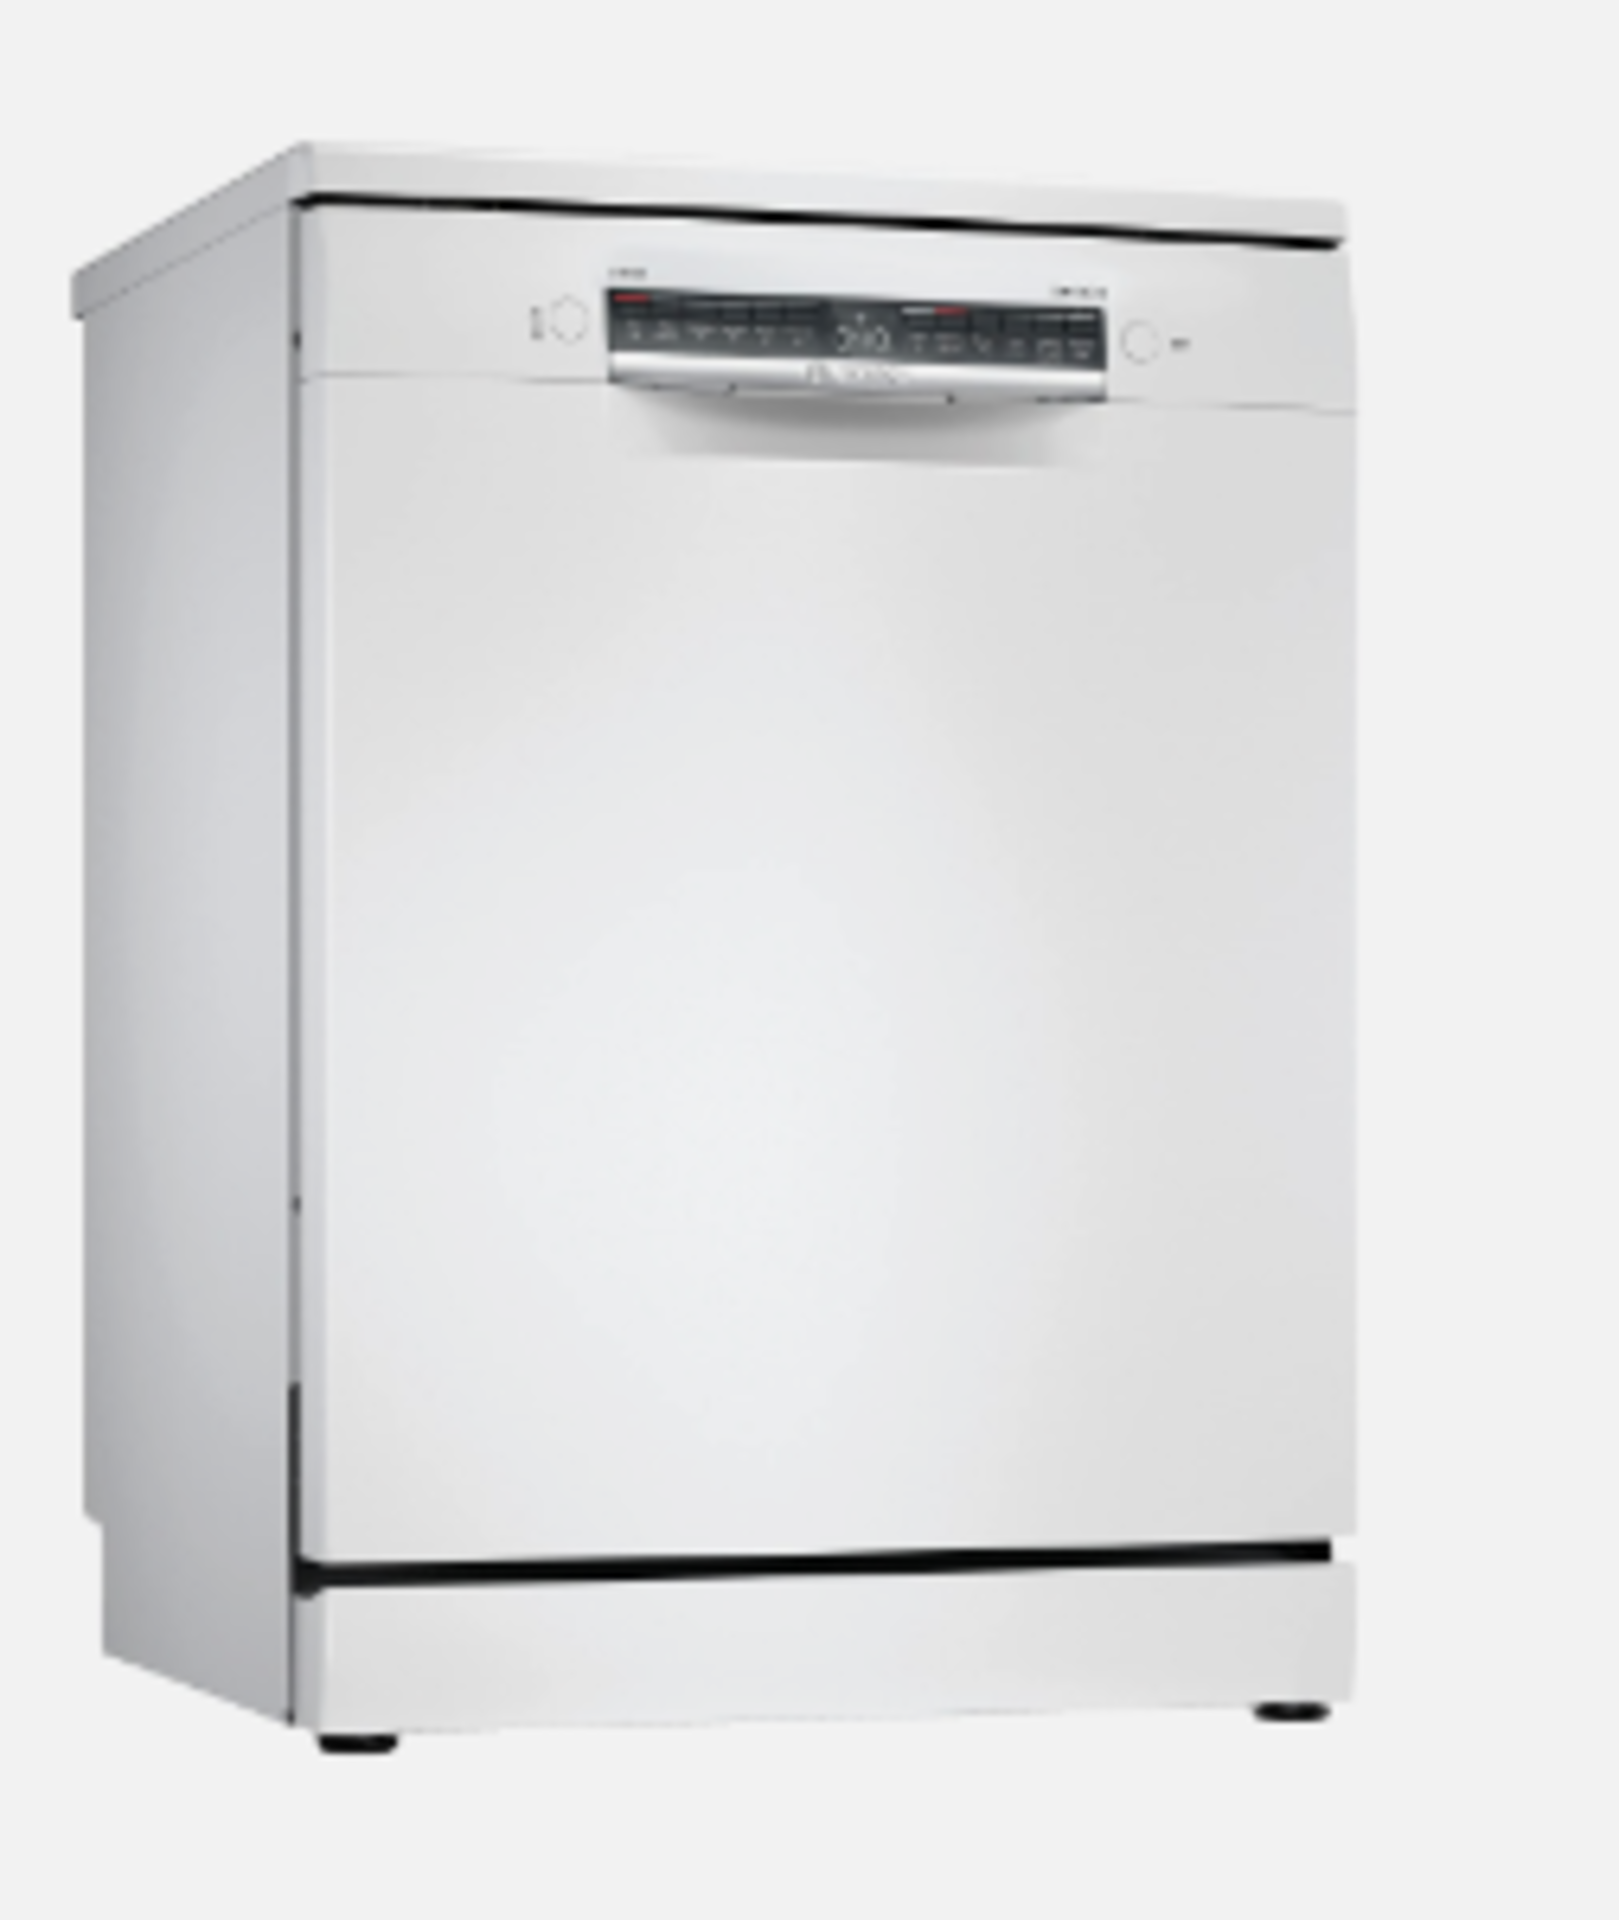 RRP £630 Bosch Series 4 Sms4Hcw40G Freestanding Dishwasher, White - Image 3 of 3